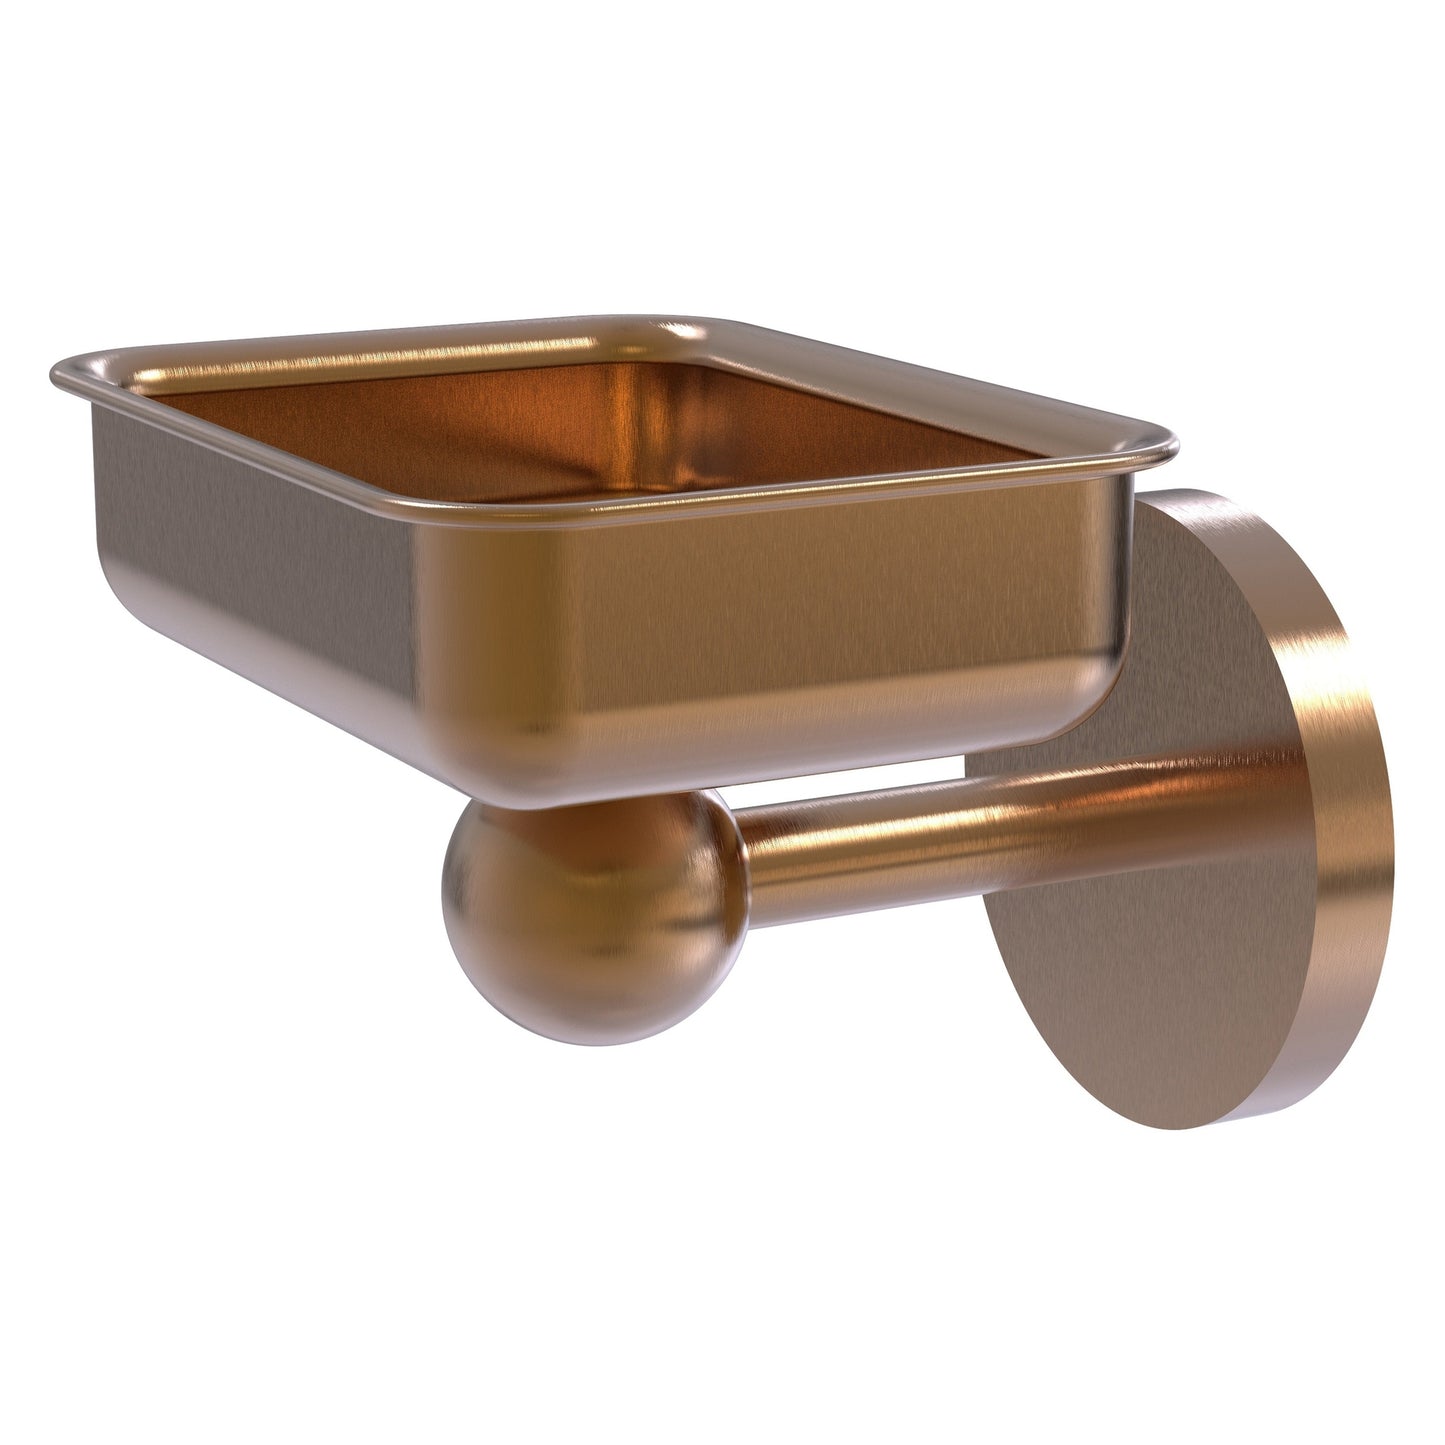 Allied Brass Skyline 4.5" x 3.5" Brushed Bronze Solid Brass Wall-Mounted Soap Dish